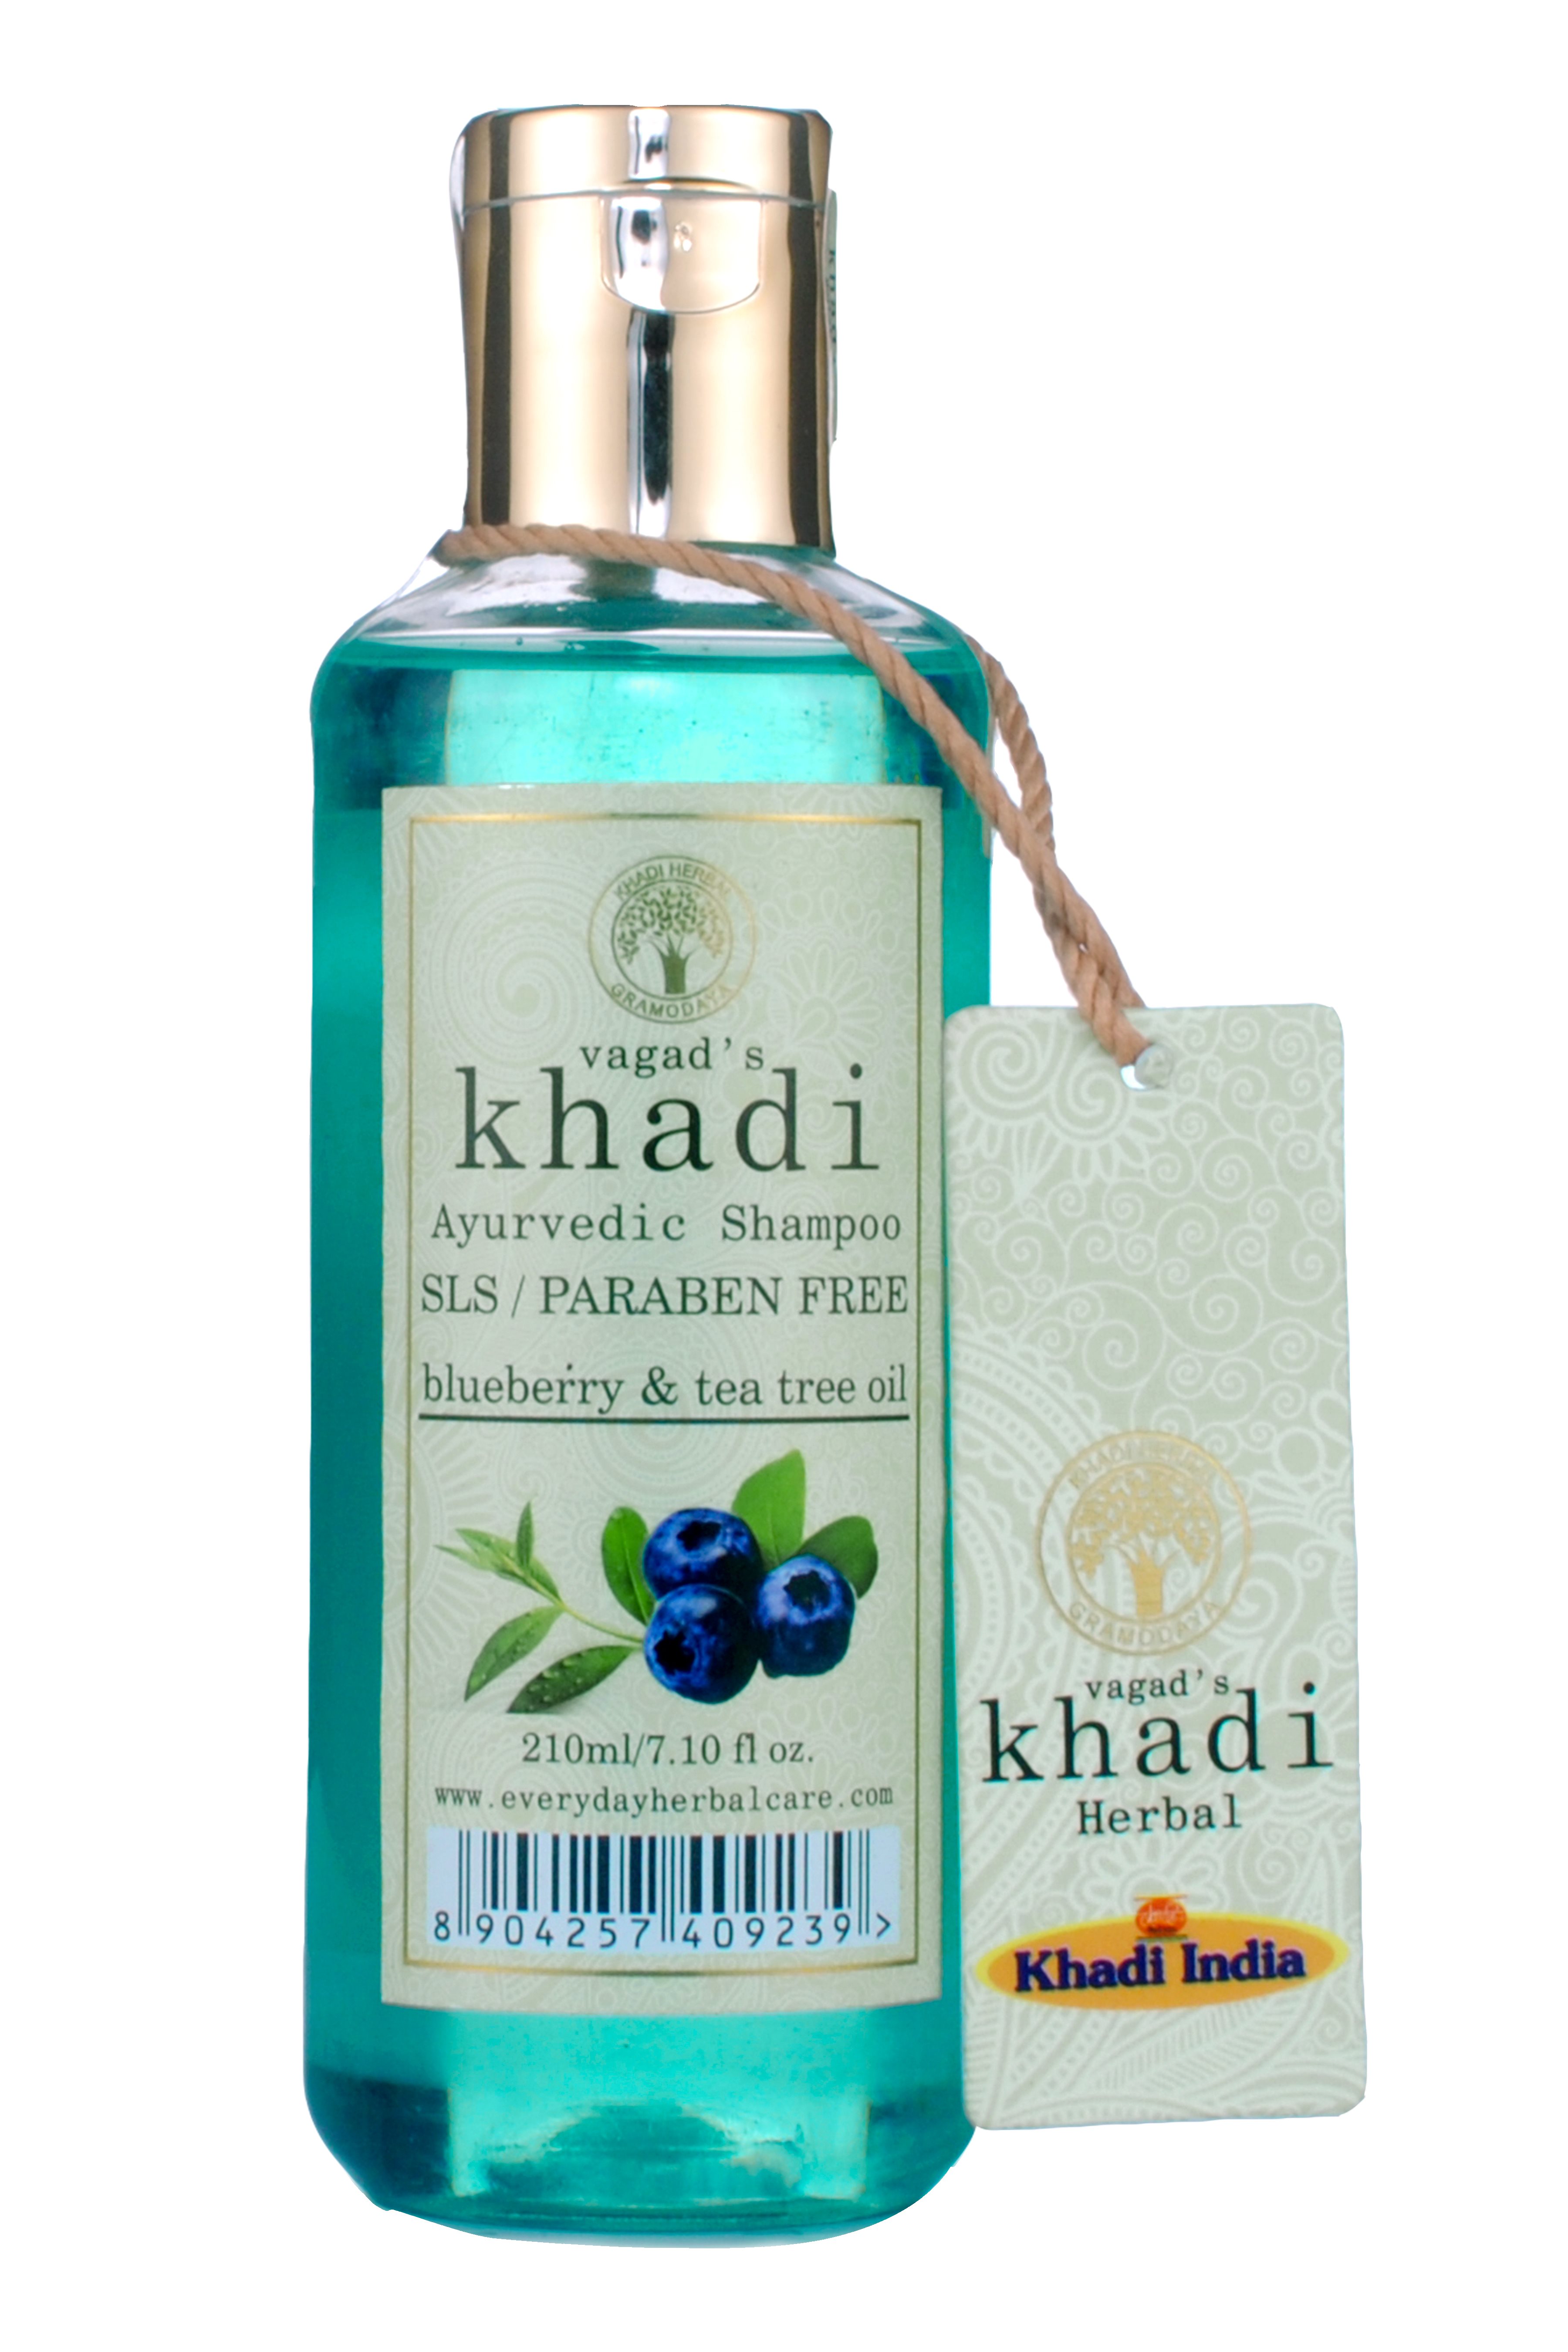 Buy Vagad's Khadi S.L.S And Paraben Free Blueberry Extract And Tea Tree Extract Shampoo at Best Price Online